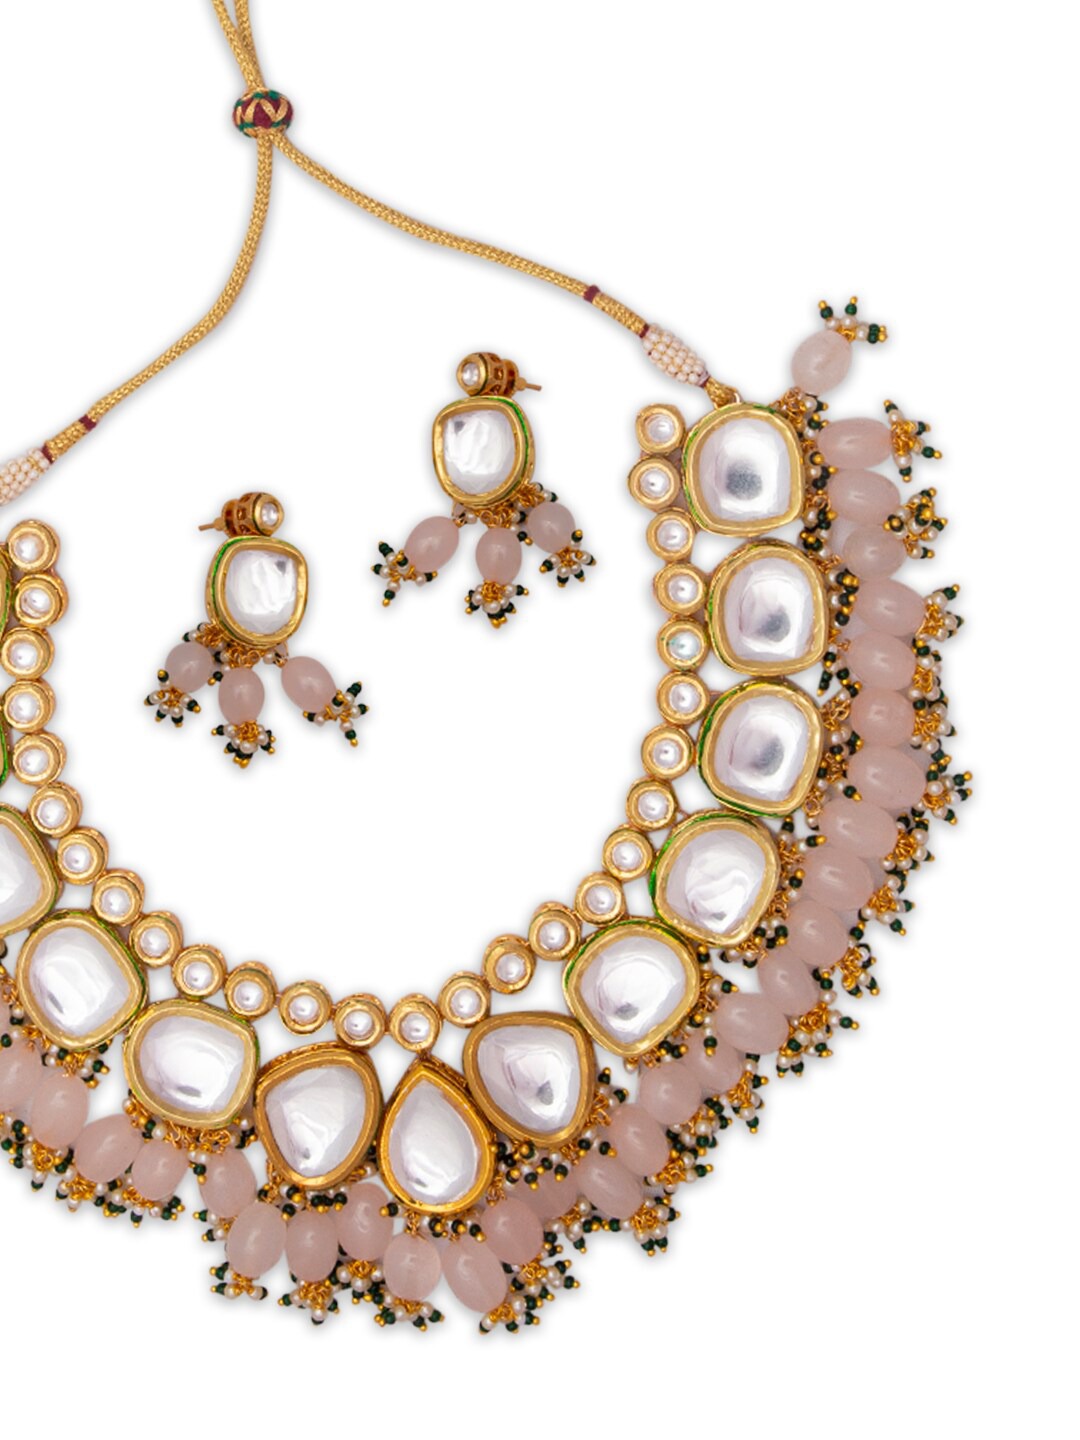 Women's Gold-Plated Handcrafted Kundan Jewellery Set - Morkanth